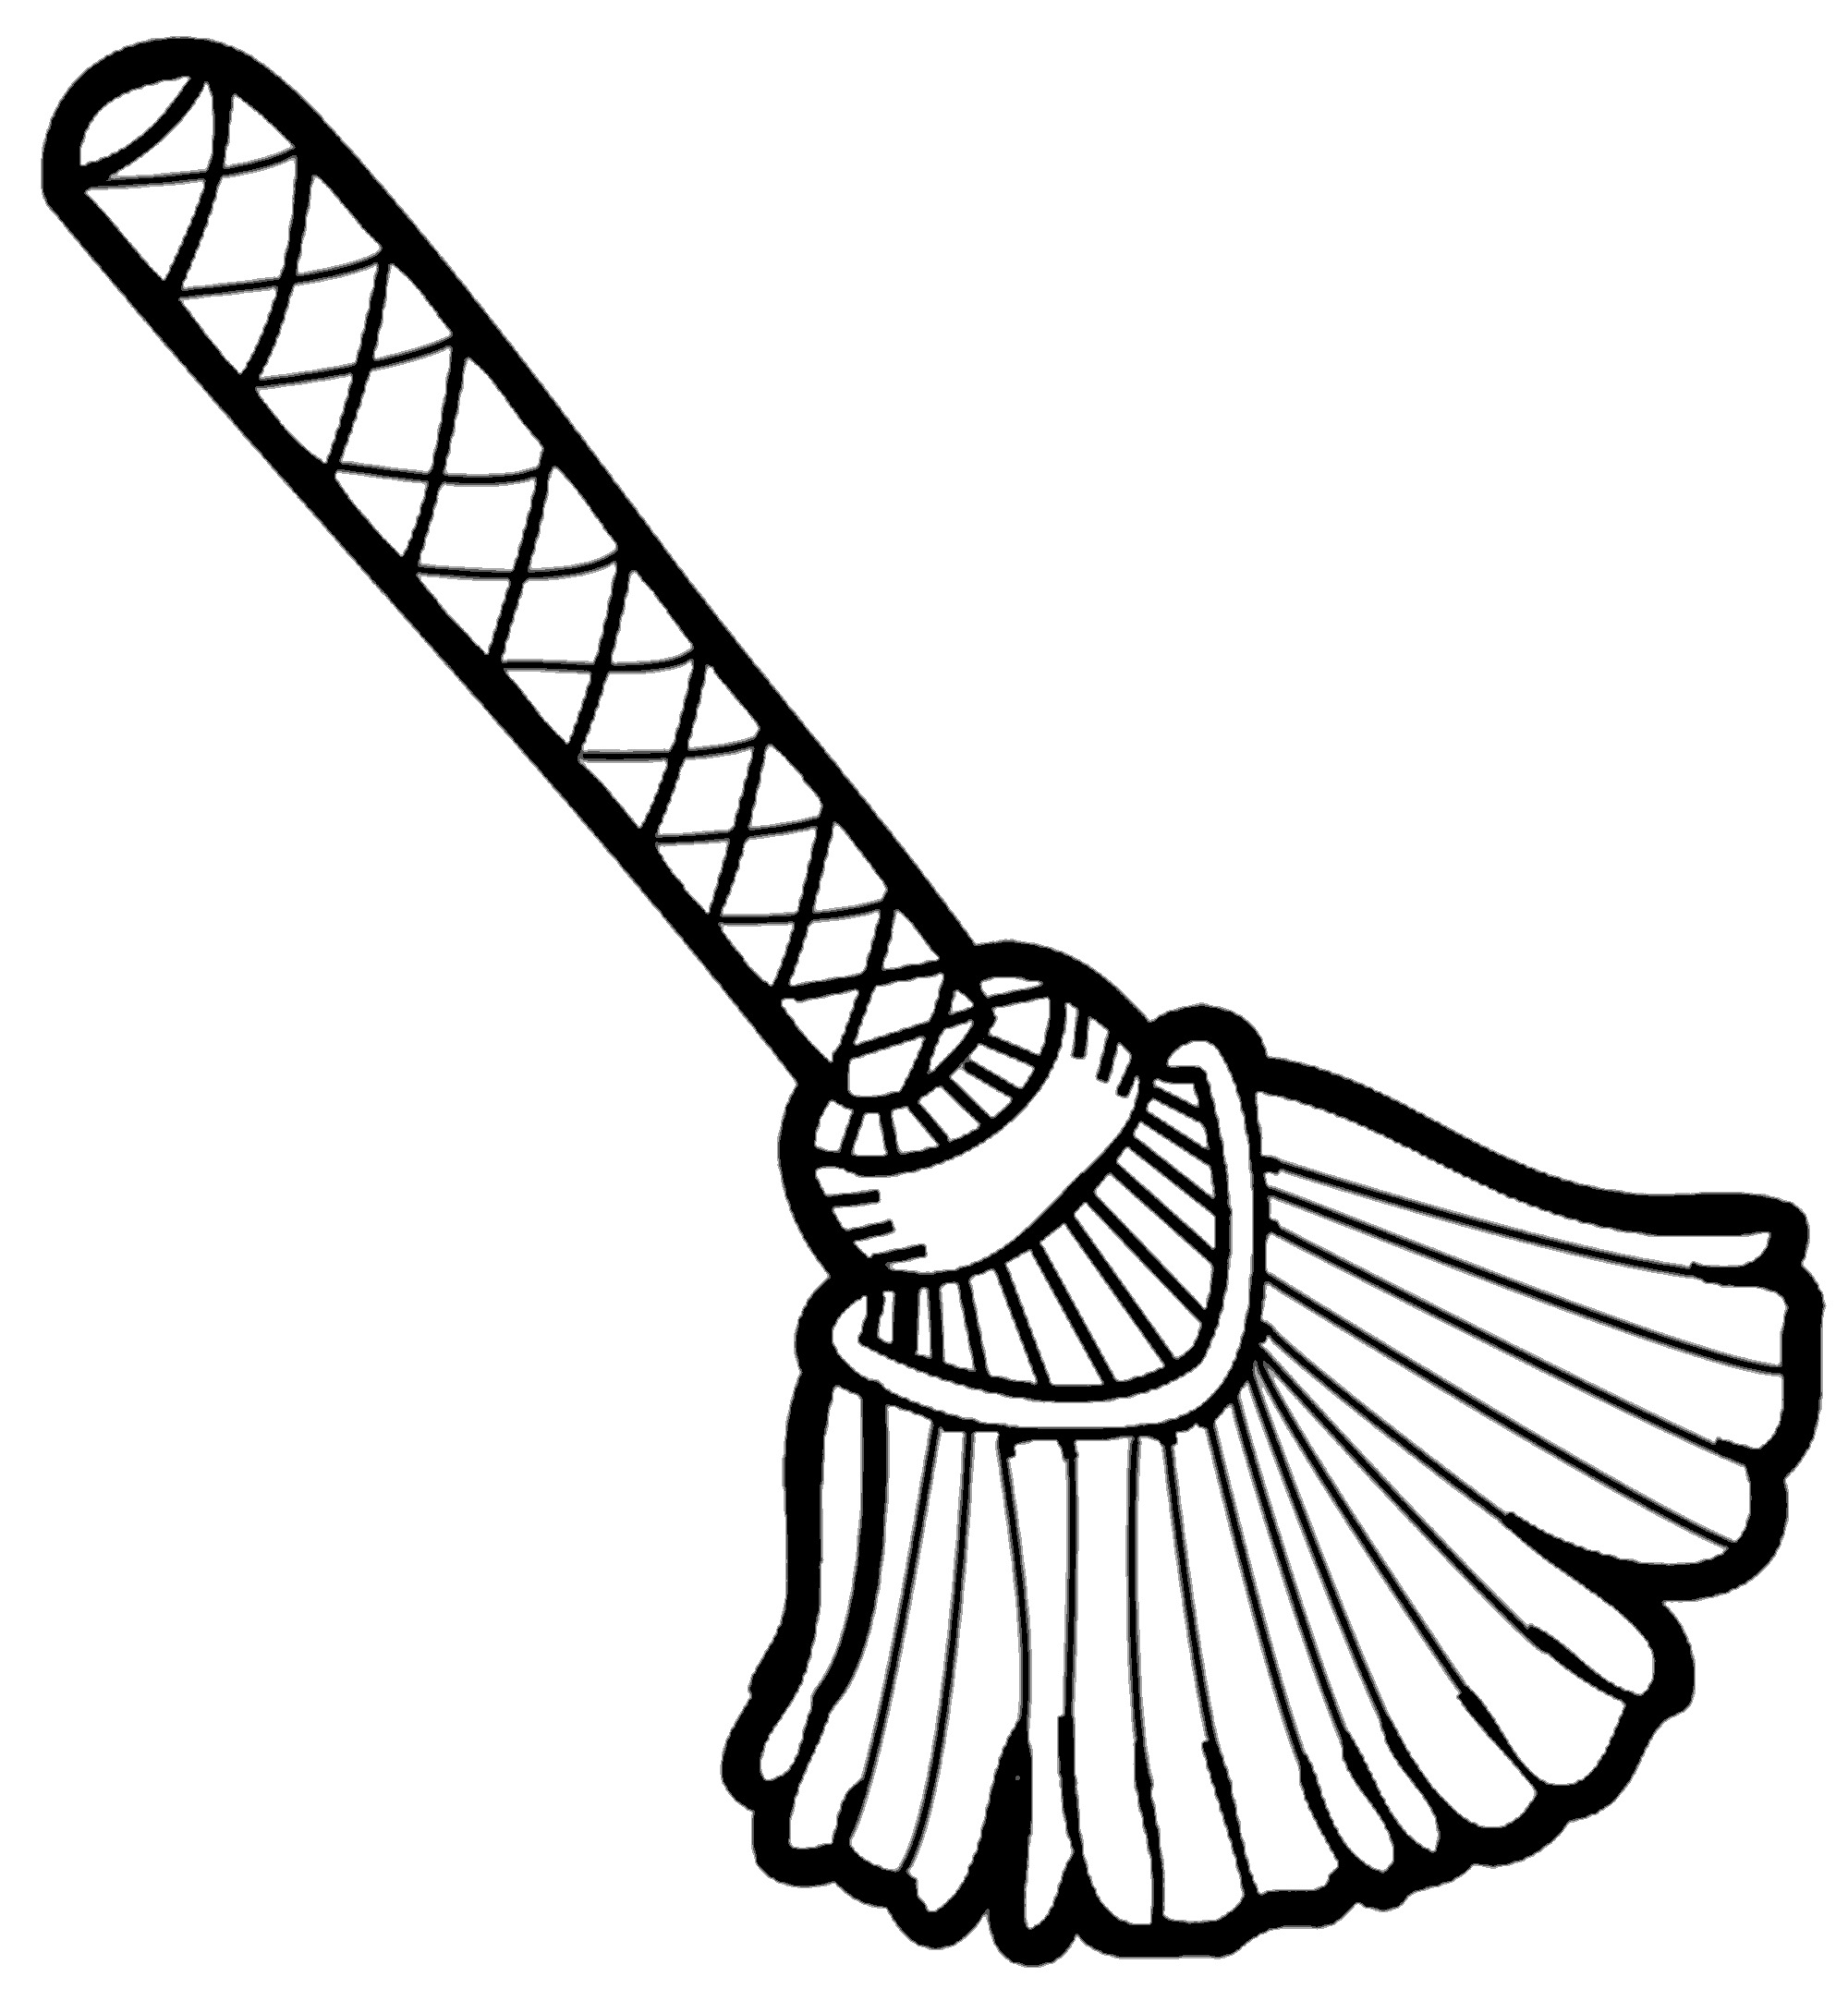 Images For > Clip Art Broom